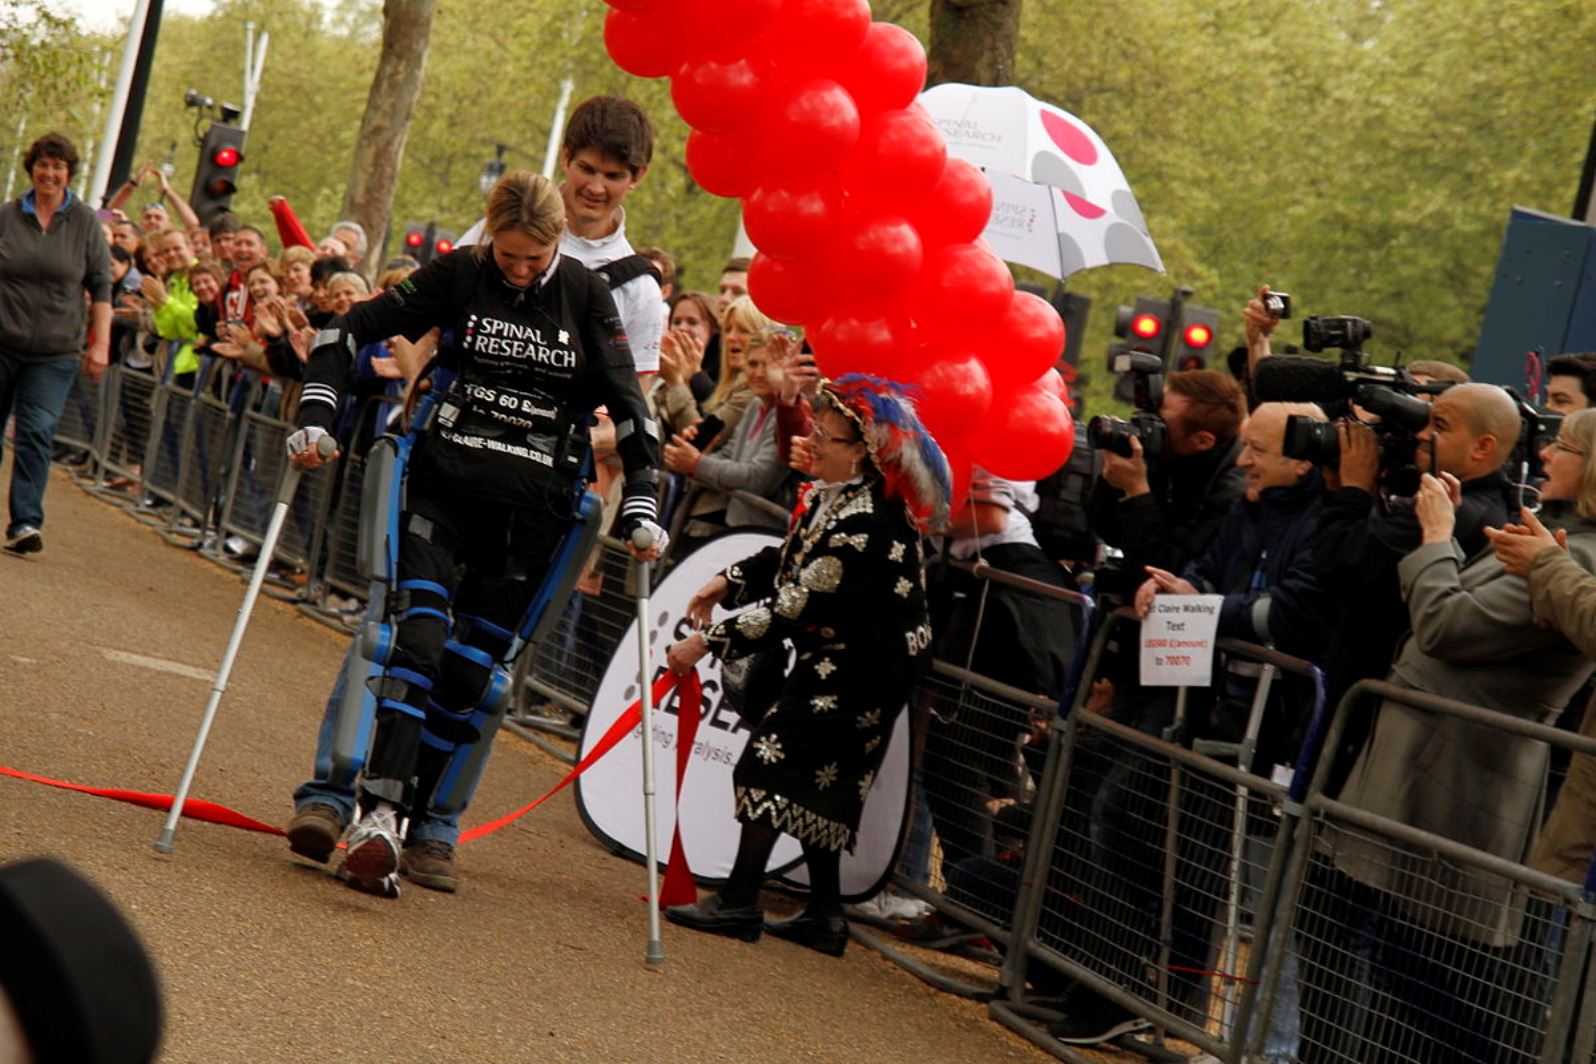 With the help of ReWalk, Claire Lomas crossed the finish line of the 2012 Virgin London Marathon. Photo via Wikipedia